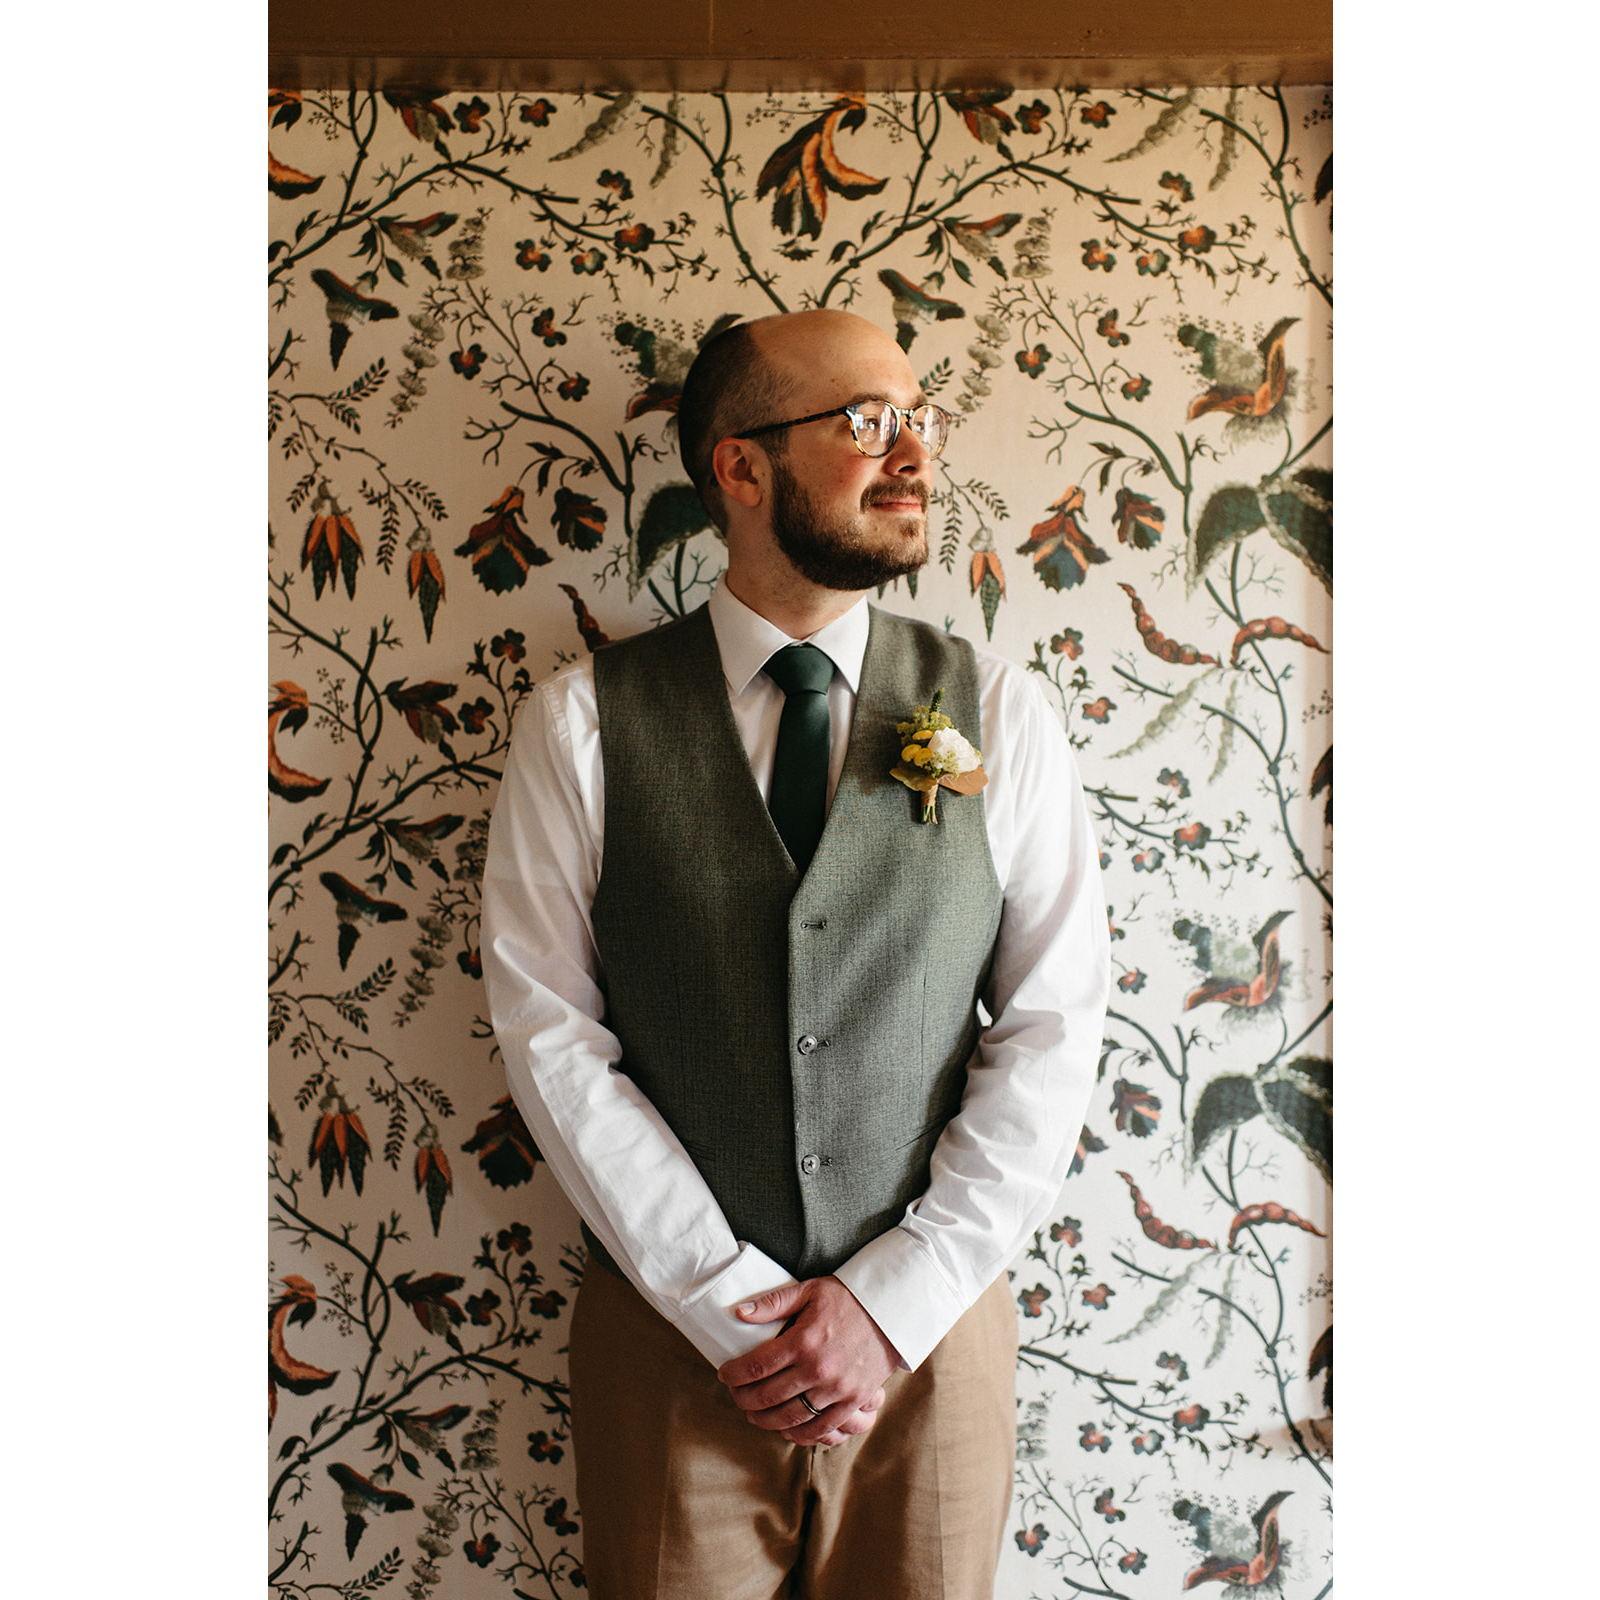 Similarly, Jordan's boutonniere featured locally sourced florals from Helios (located just down the street from our hotel!)